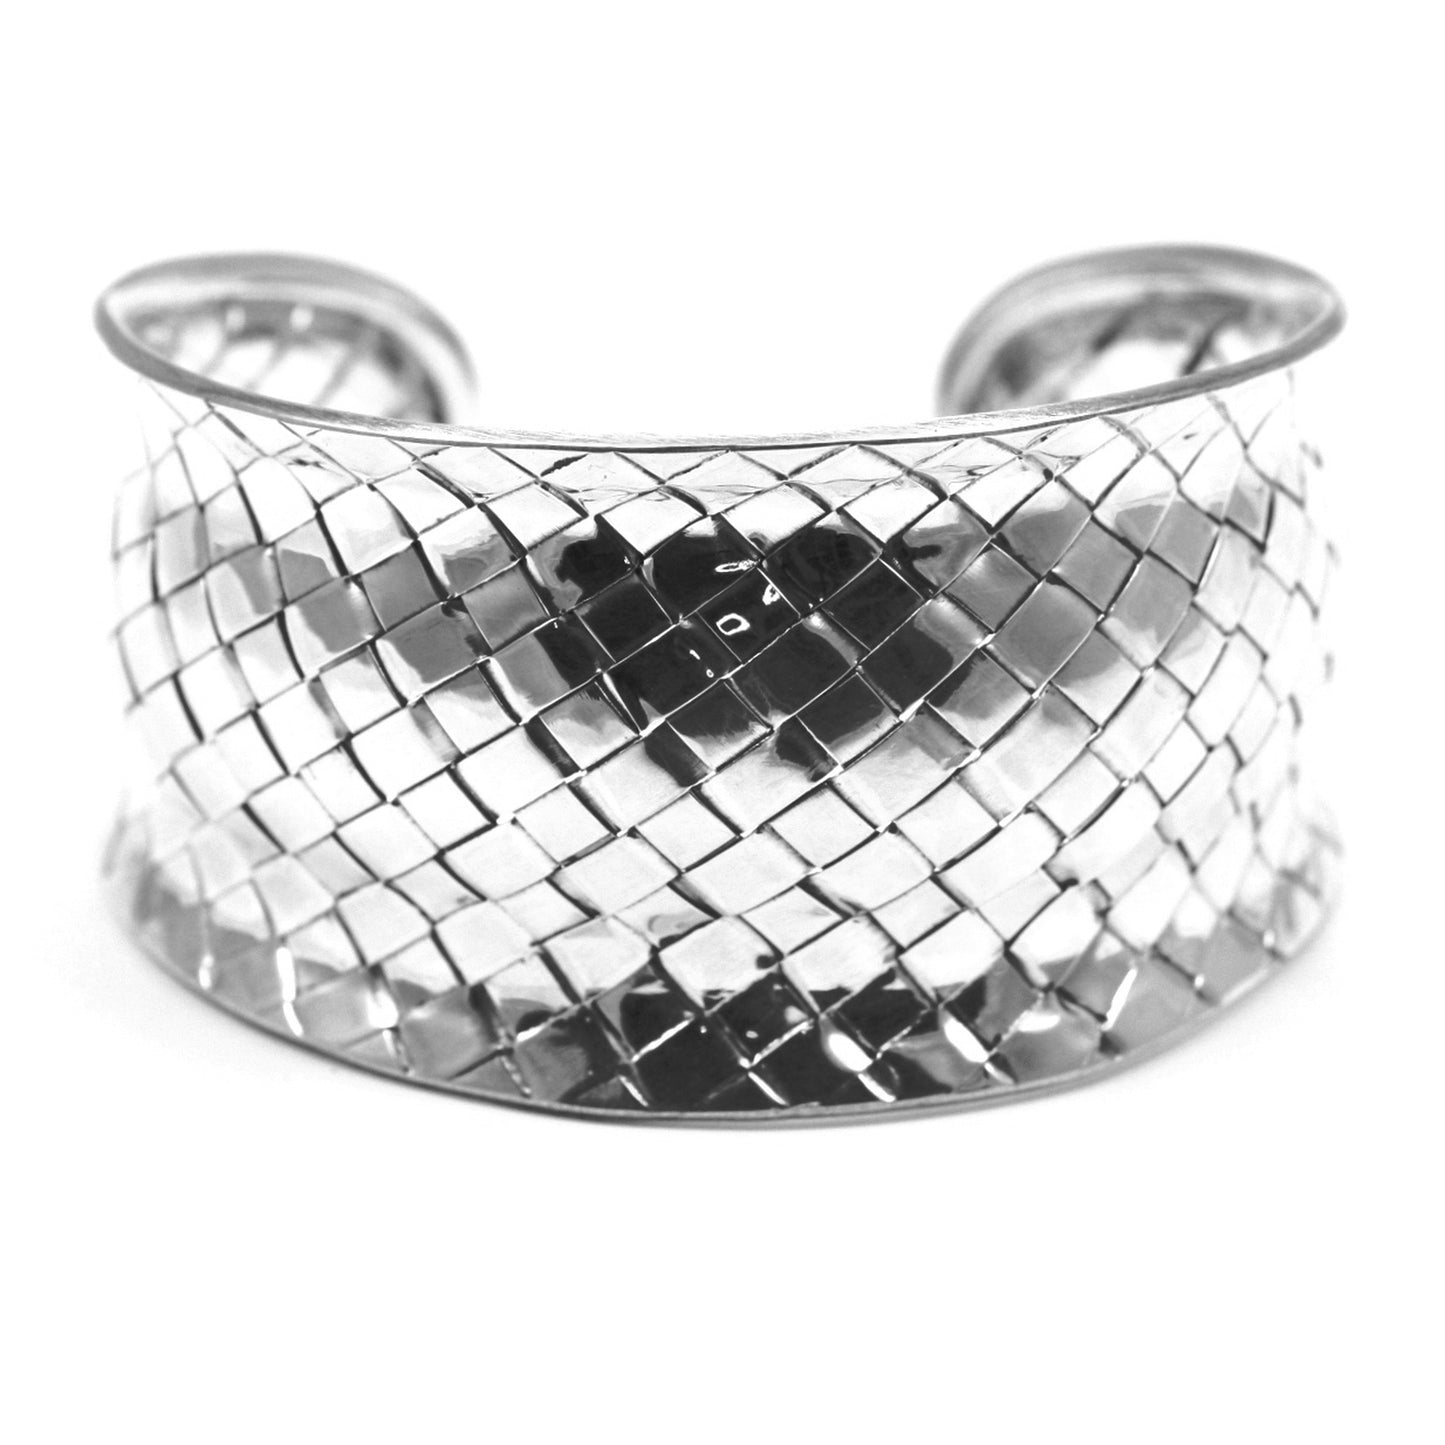 Woven silver cuff bracelet with multiple curves.